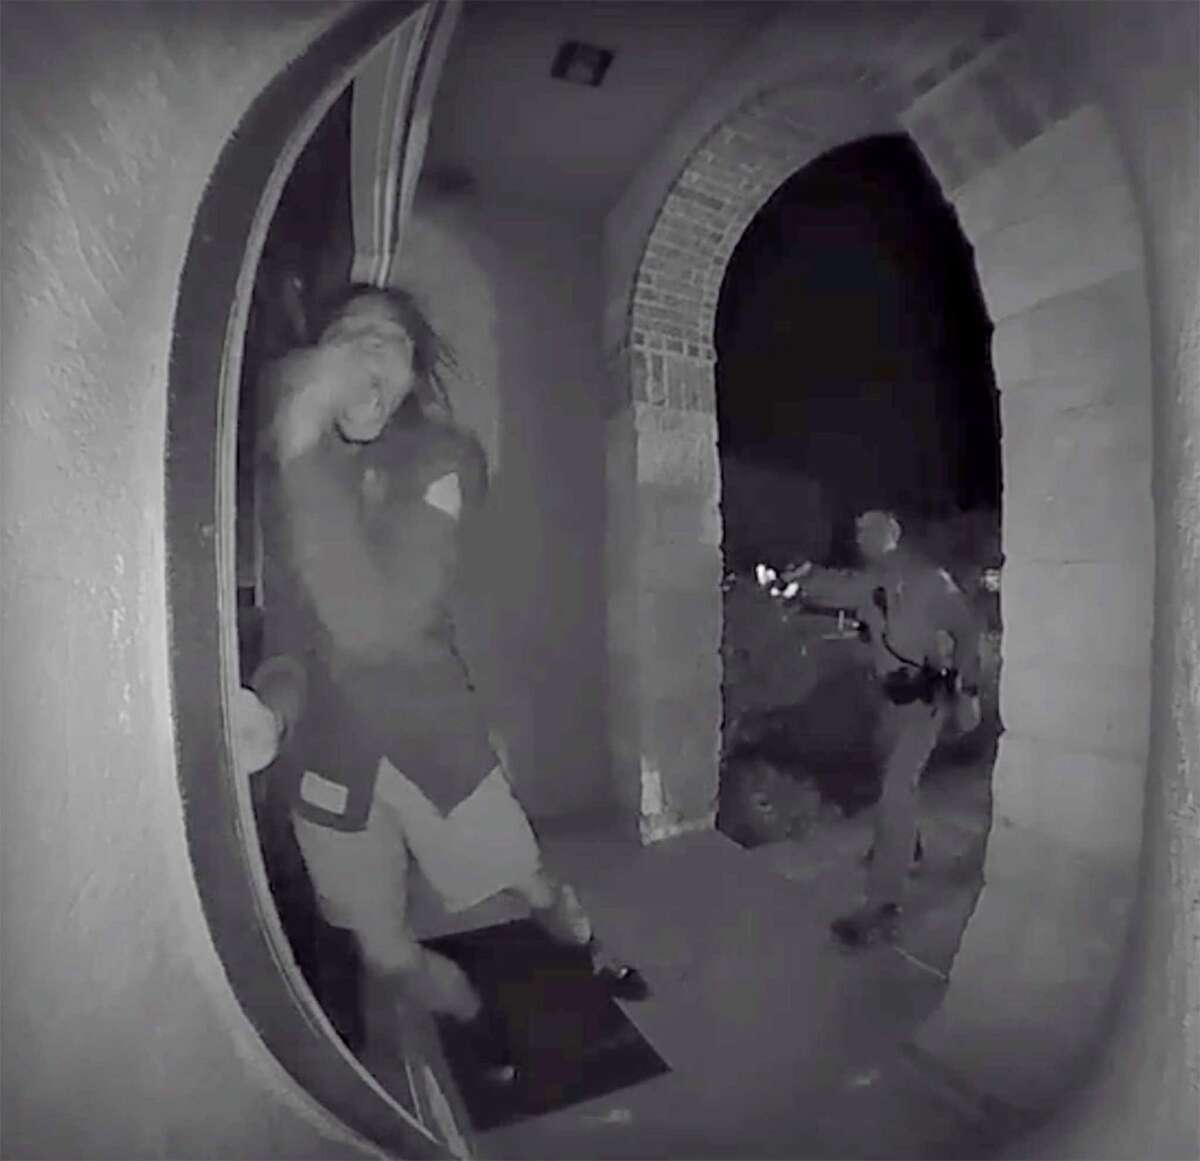 A screen grab from a home surveillance video shows a Schertz police officer using a Taser on Zekee Rayford, 18, as he pounds on the front door his home while calling for his parents.